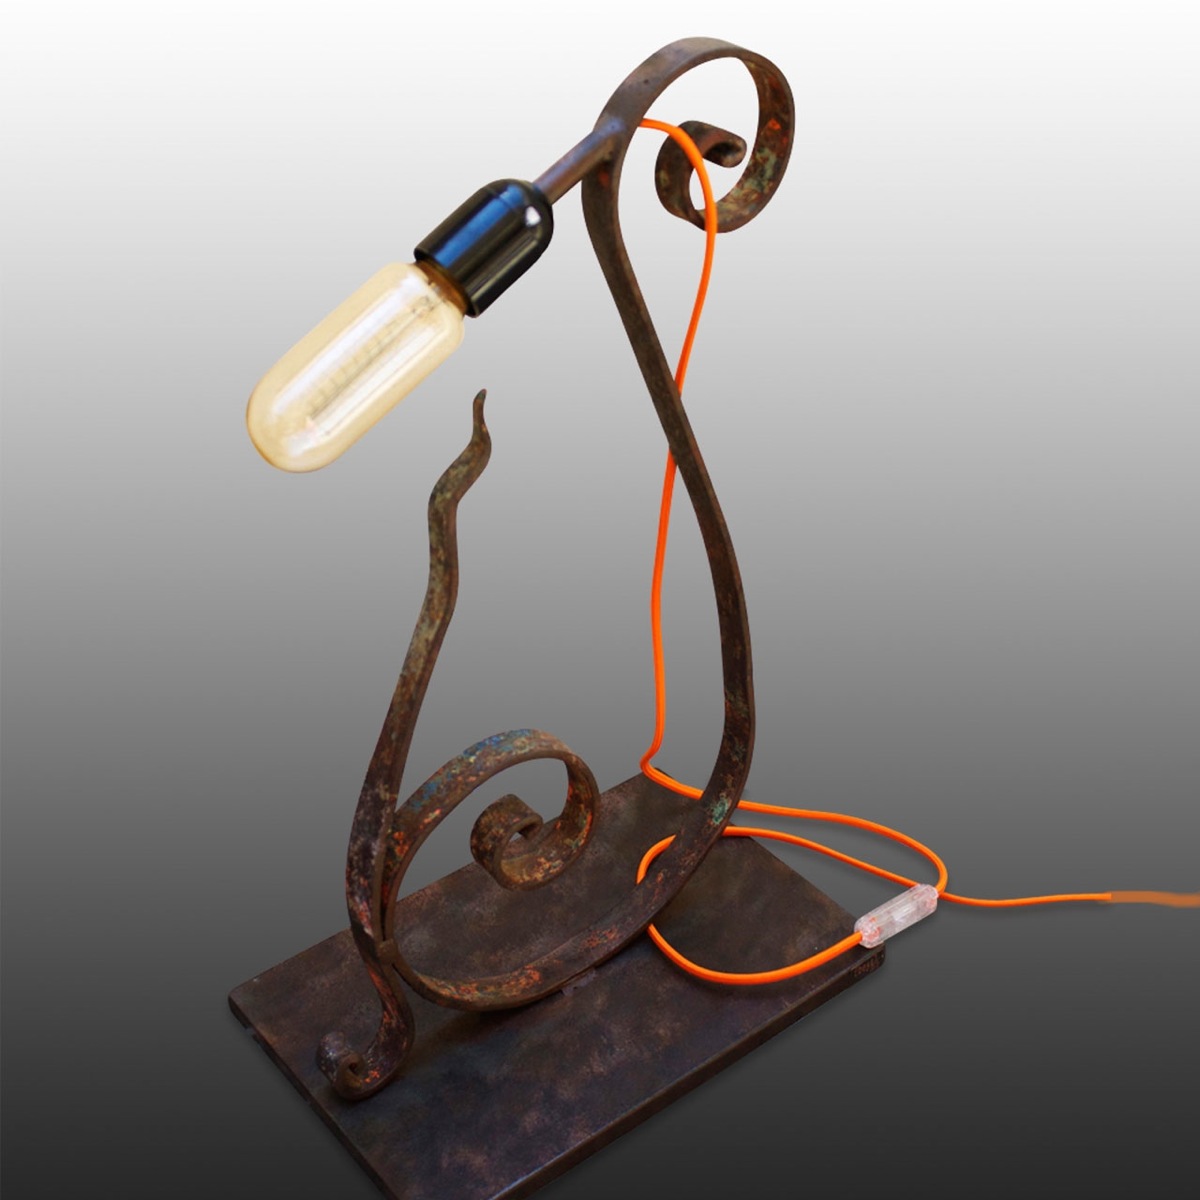 The Fekra lamp was ordered by Lane Crawford department store. 